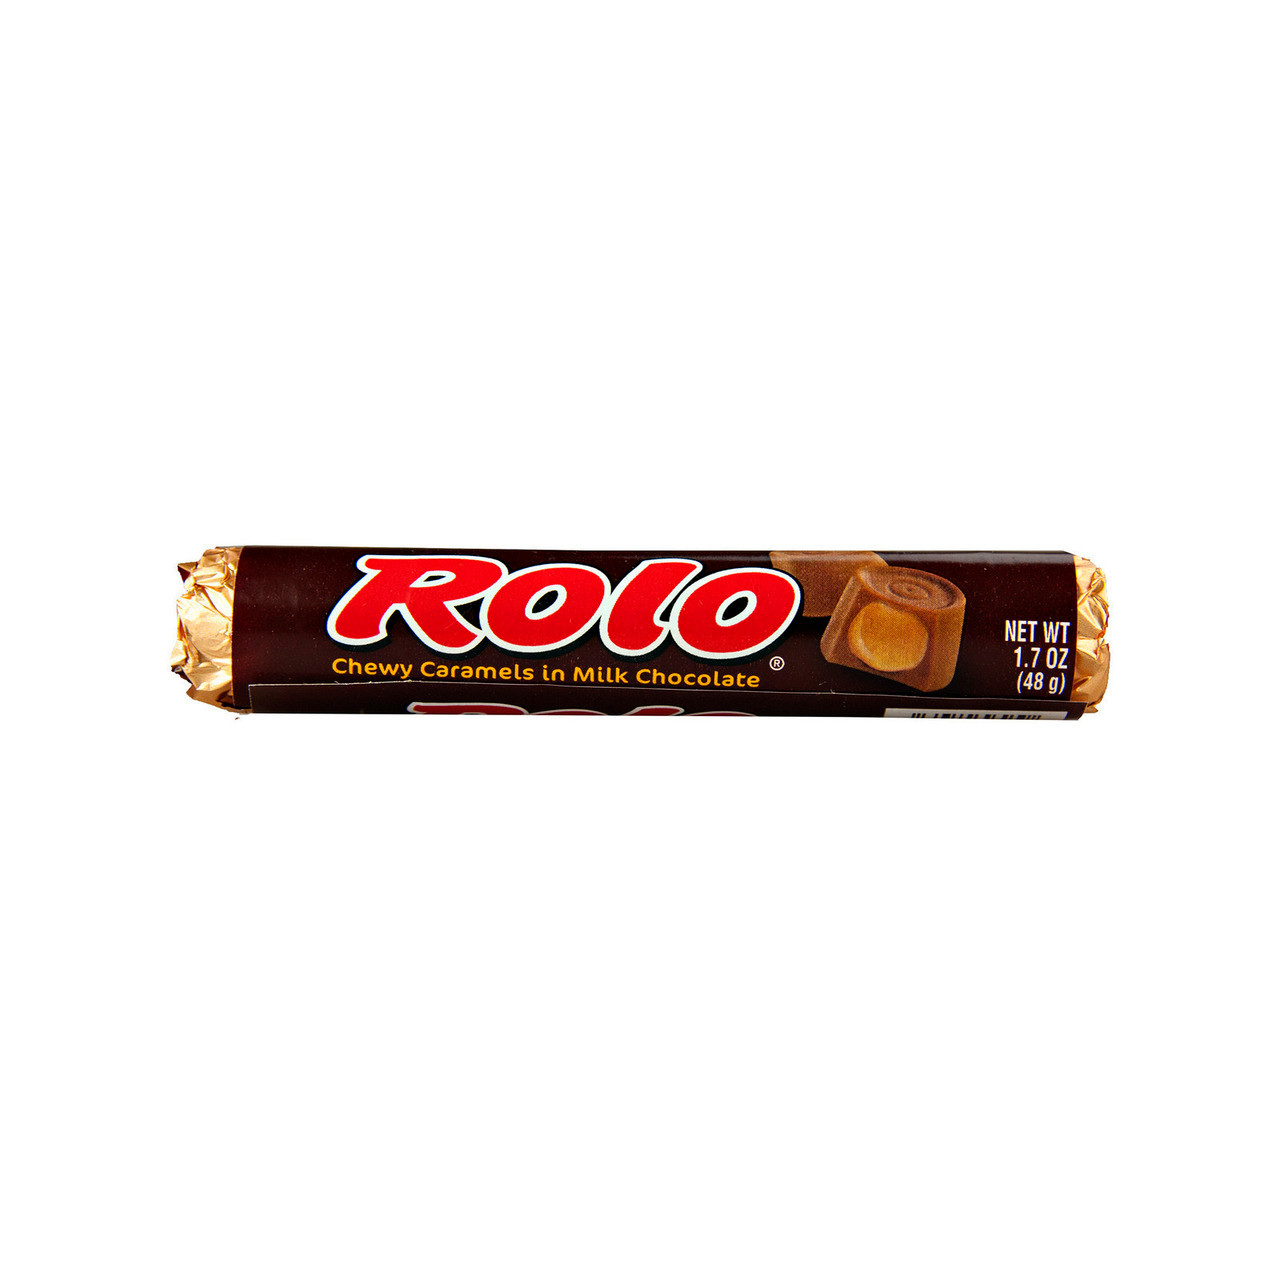 Rolo Candy - 34 oz